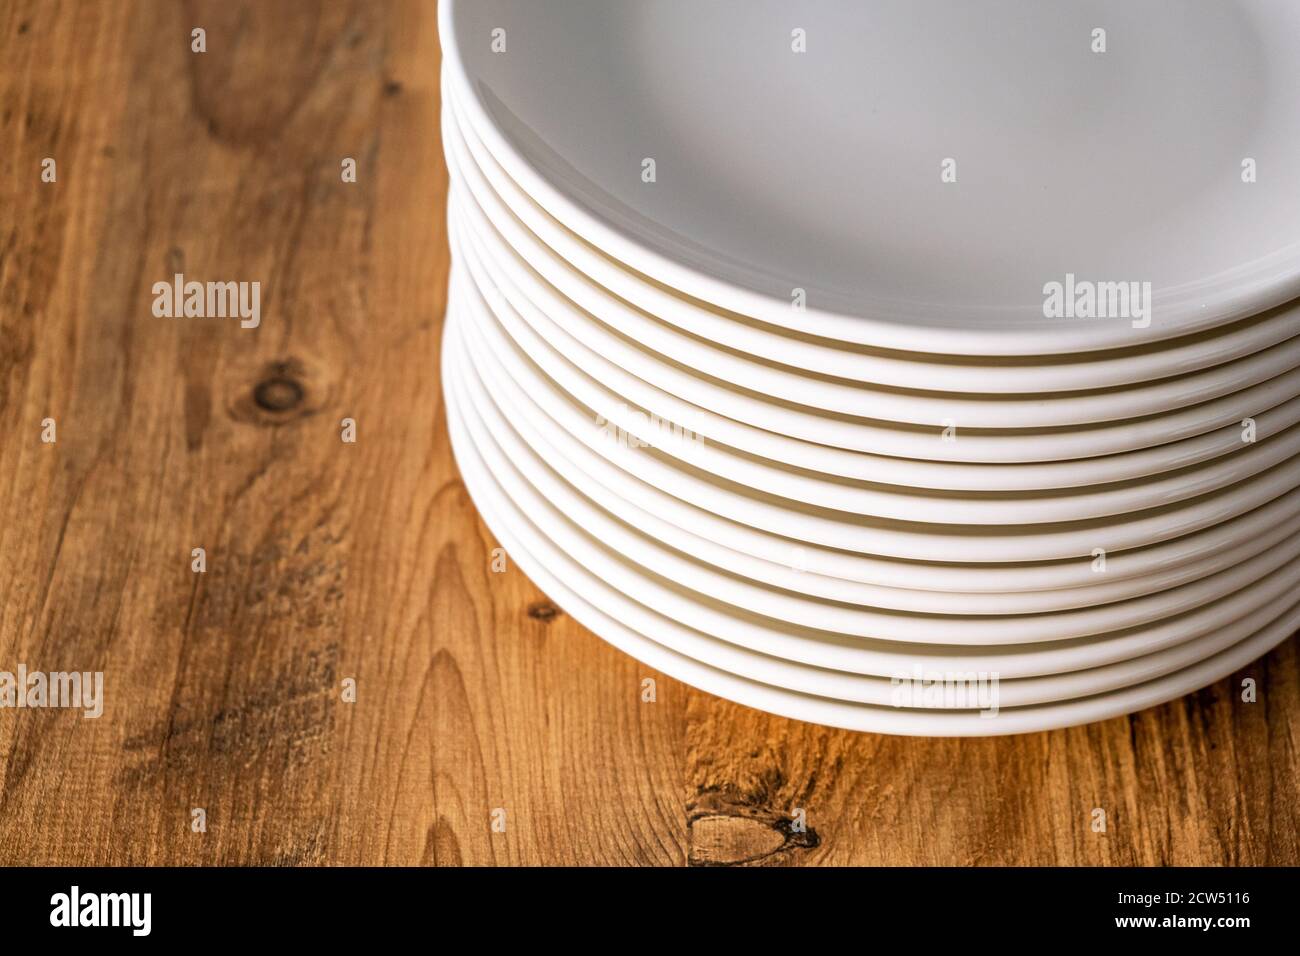 many Clean white plates dishes kitchenwear on table Stock Photo